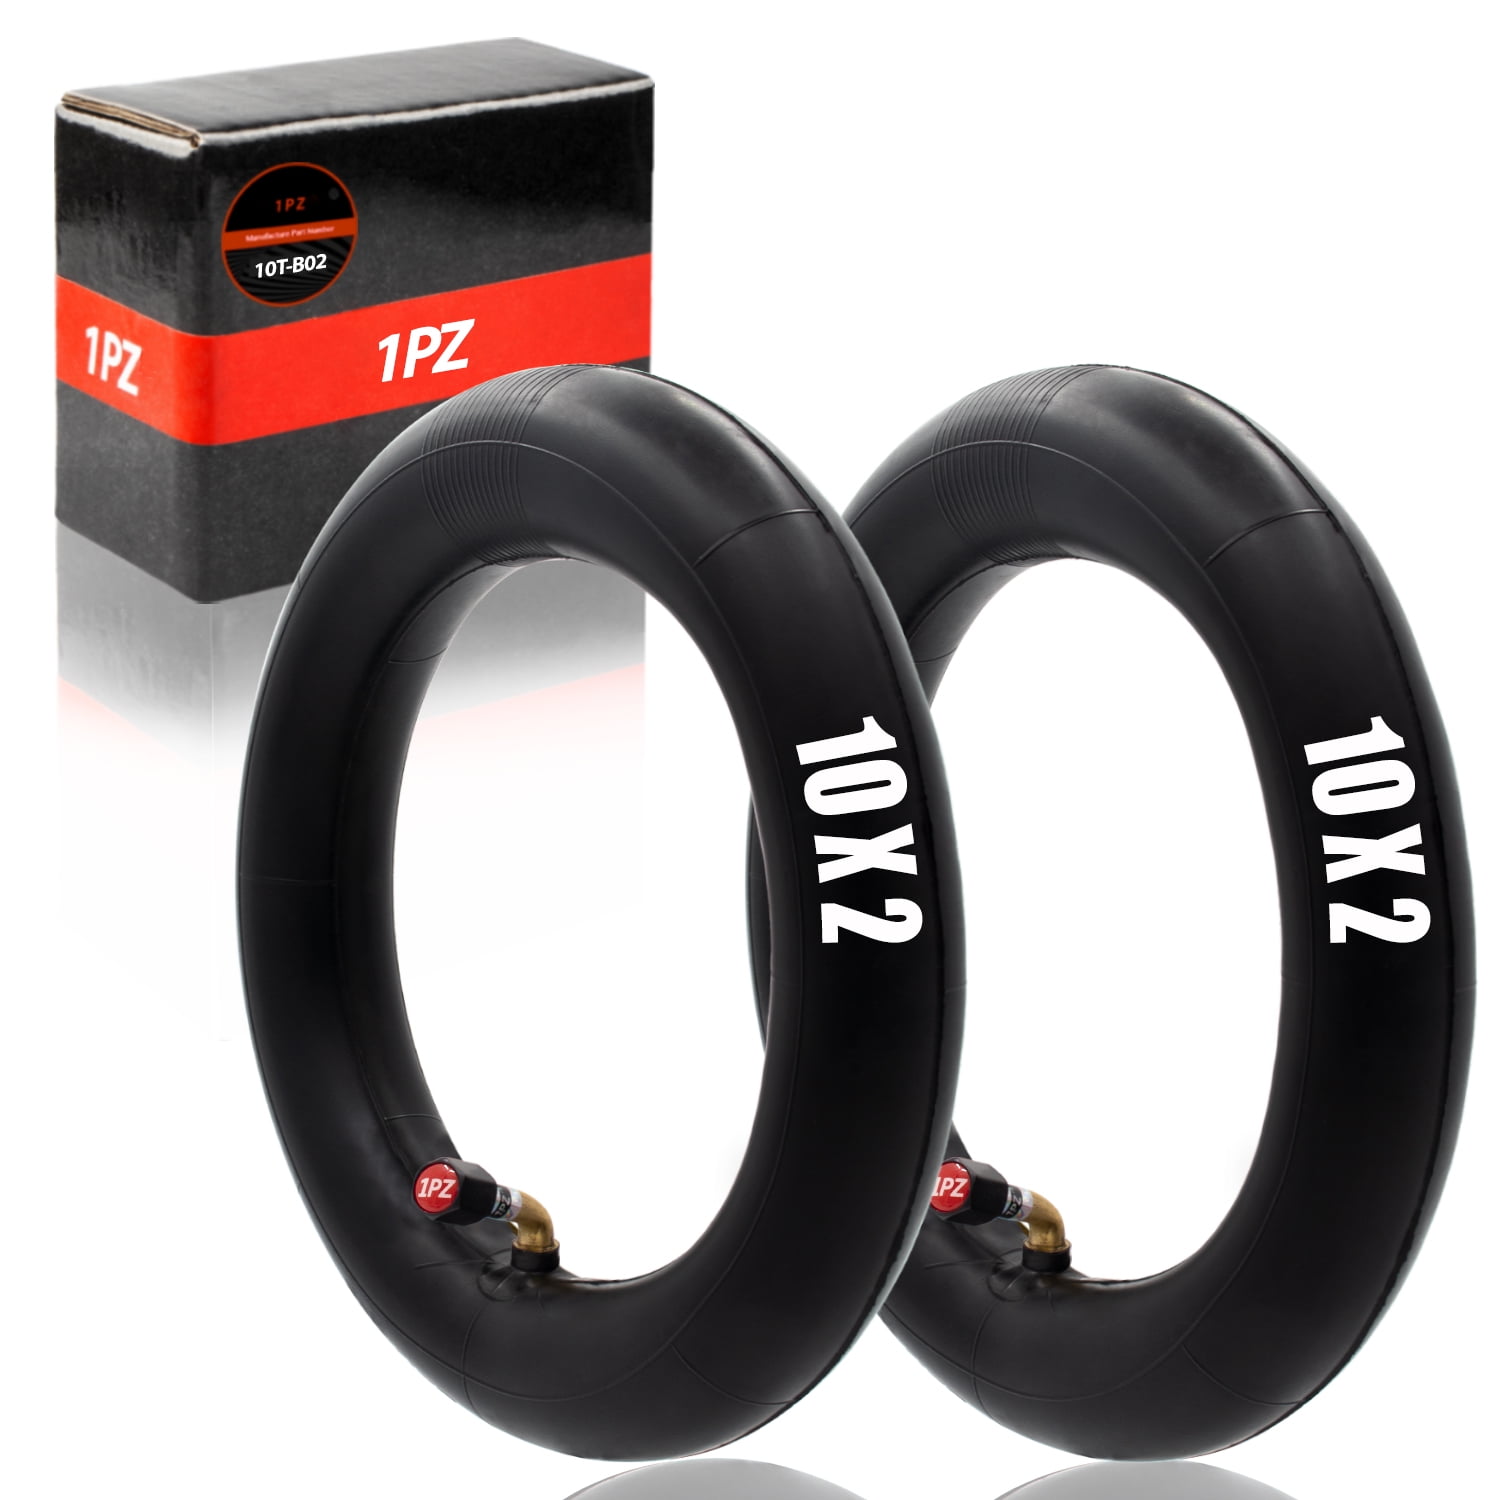 10 X 2.125 Outer Inner Tube For 10inch 10*2.125 Electric Scooter-2 Pack 